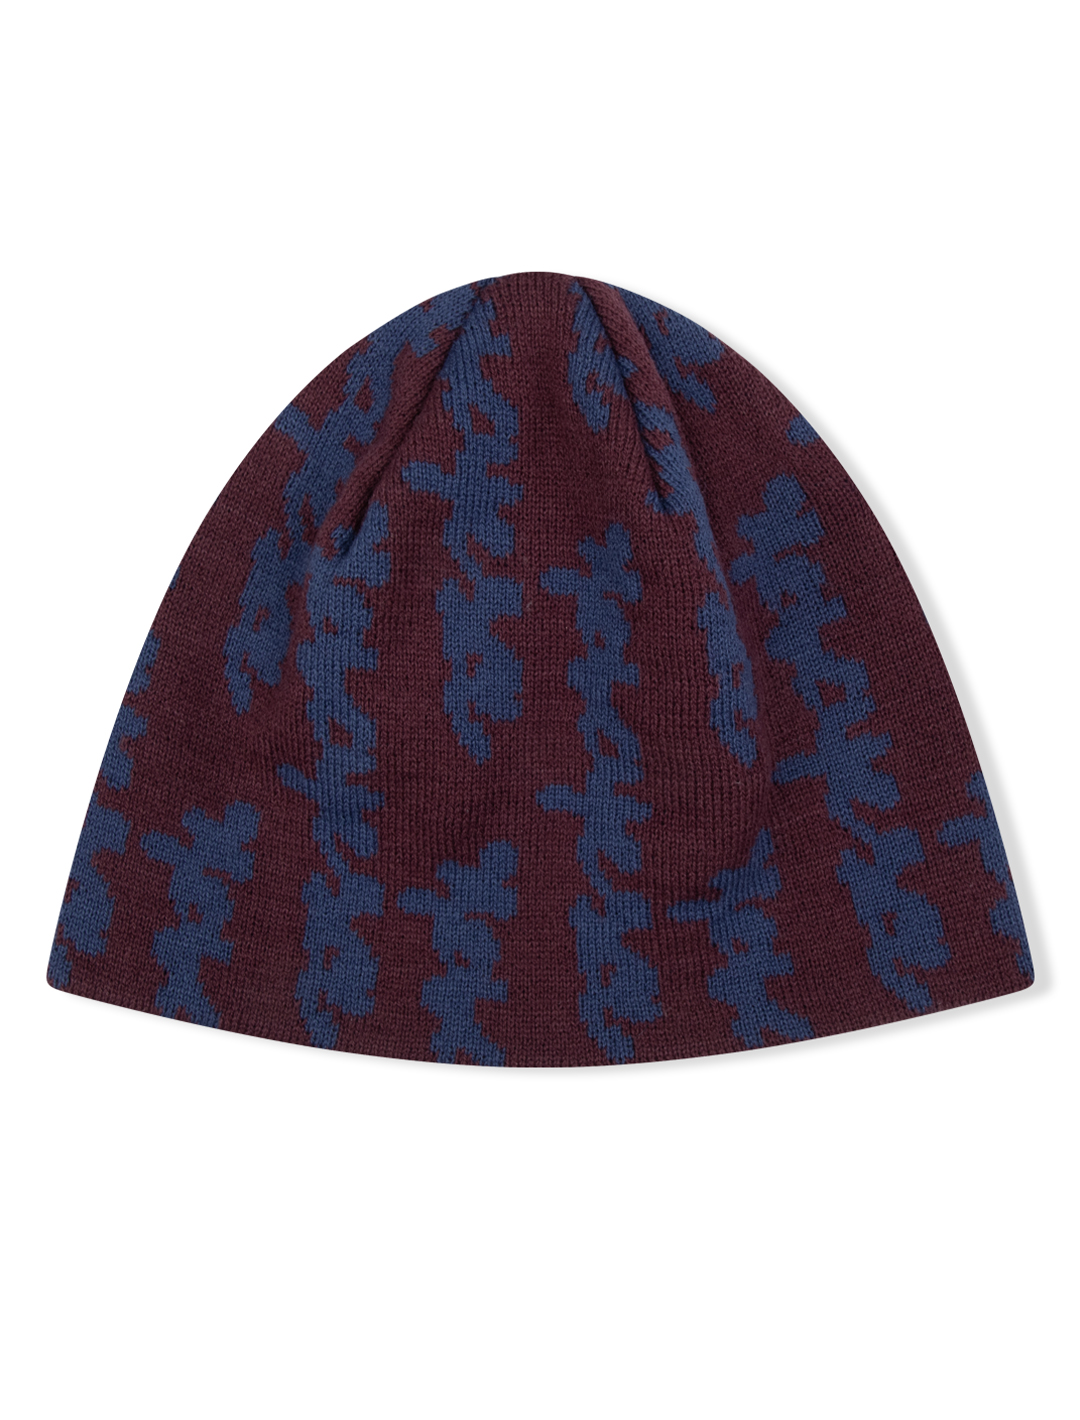 Doodled Jacquard Beanie Brown